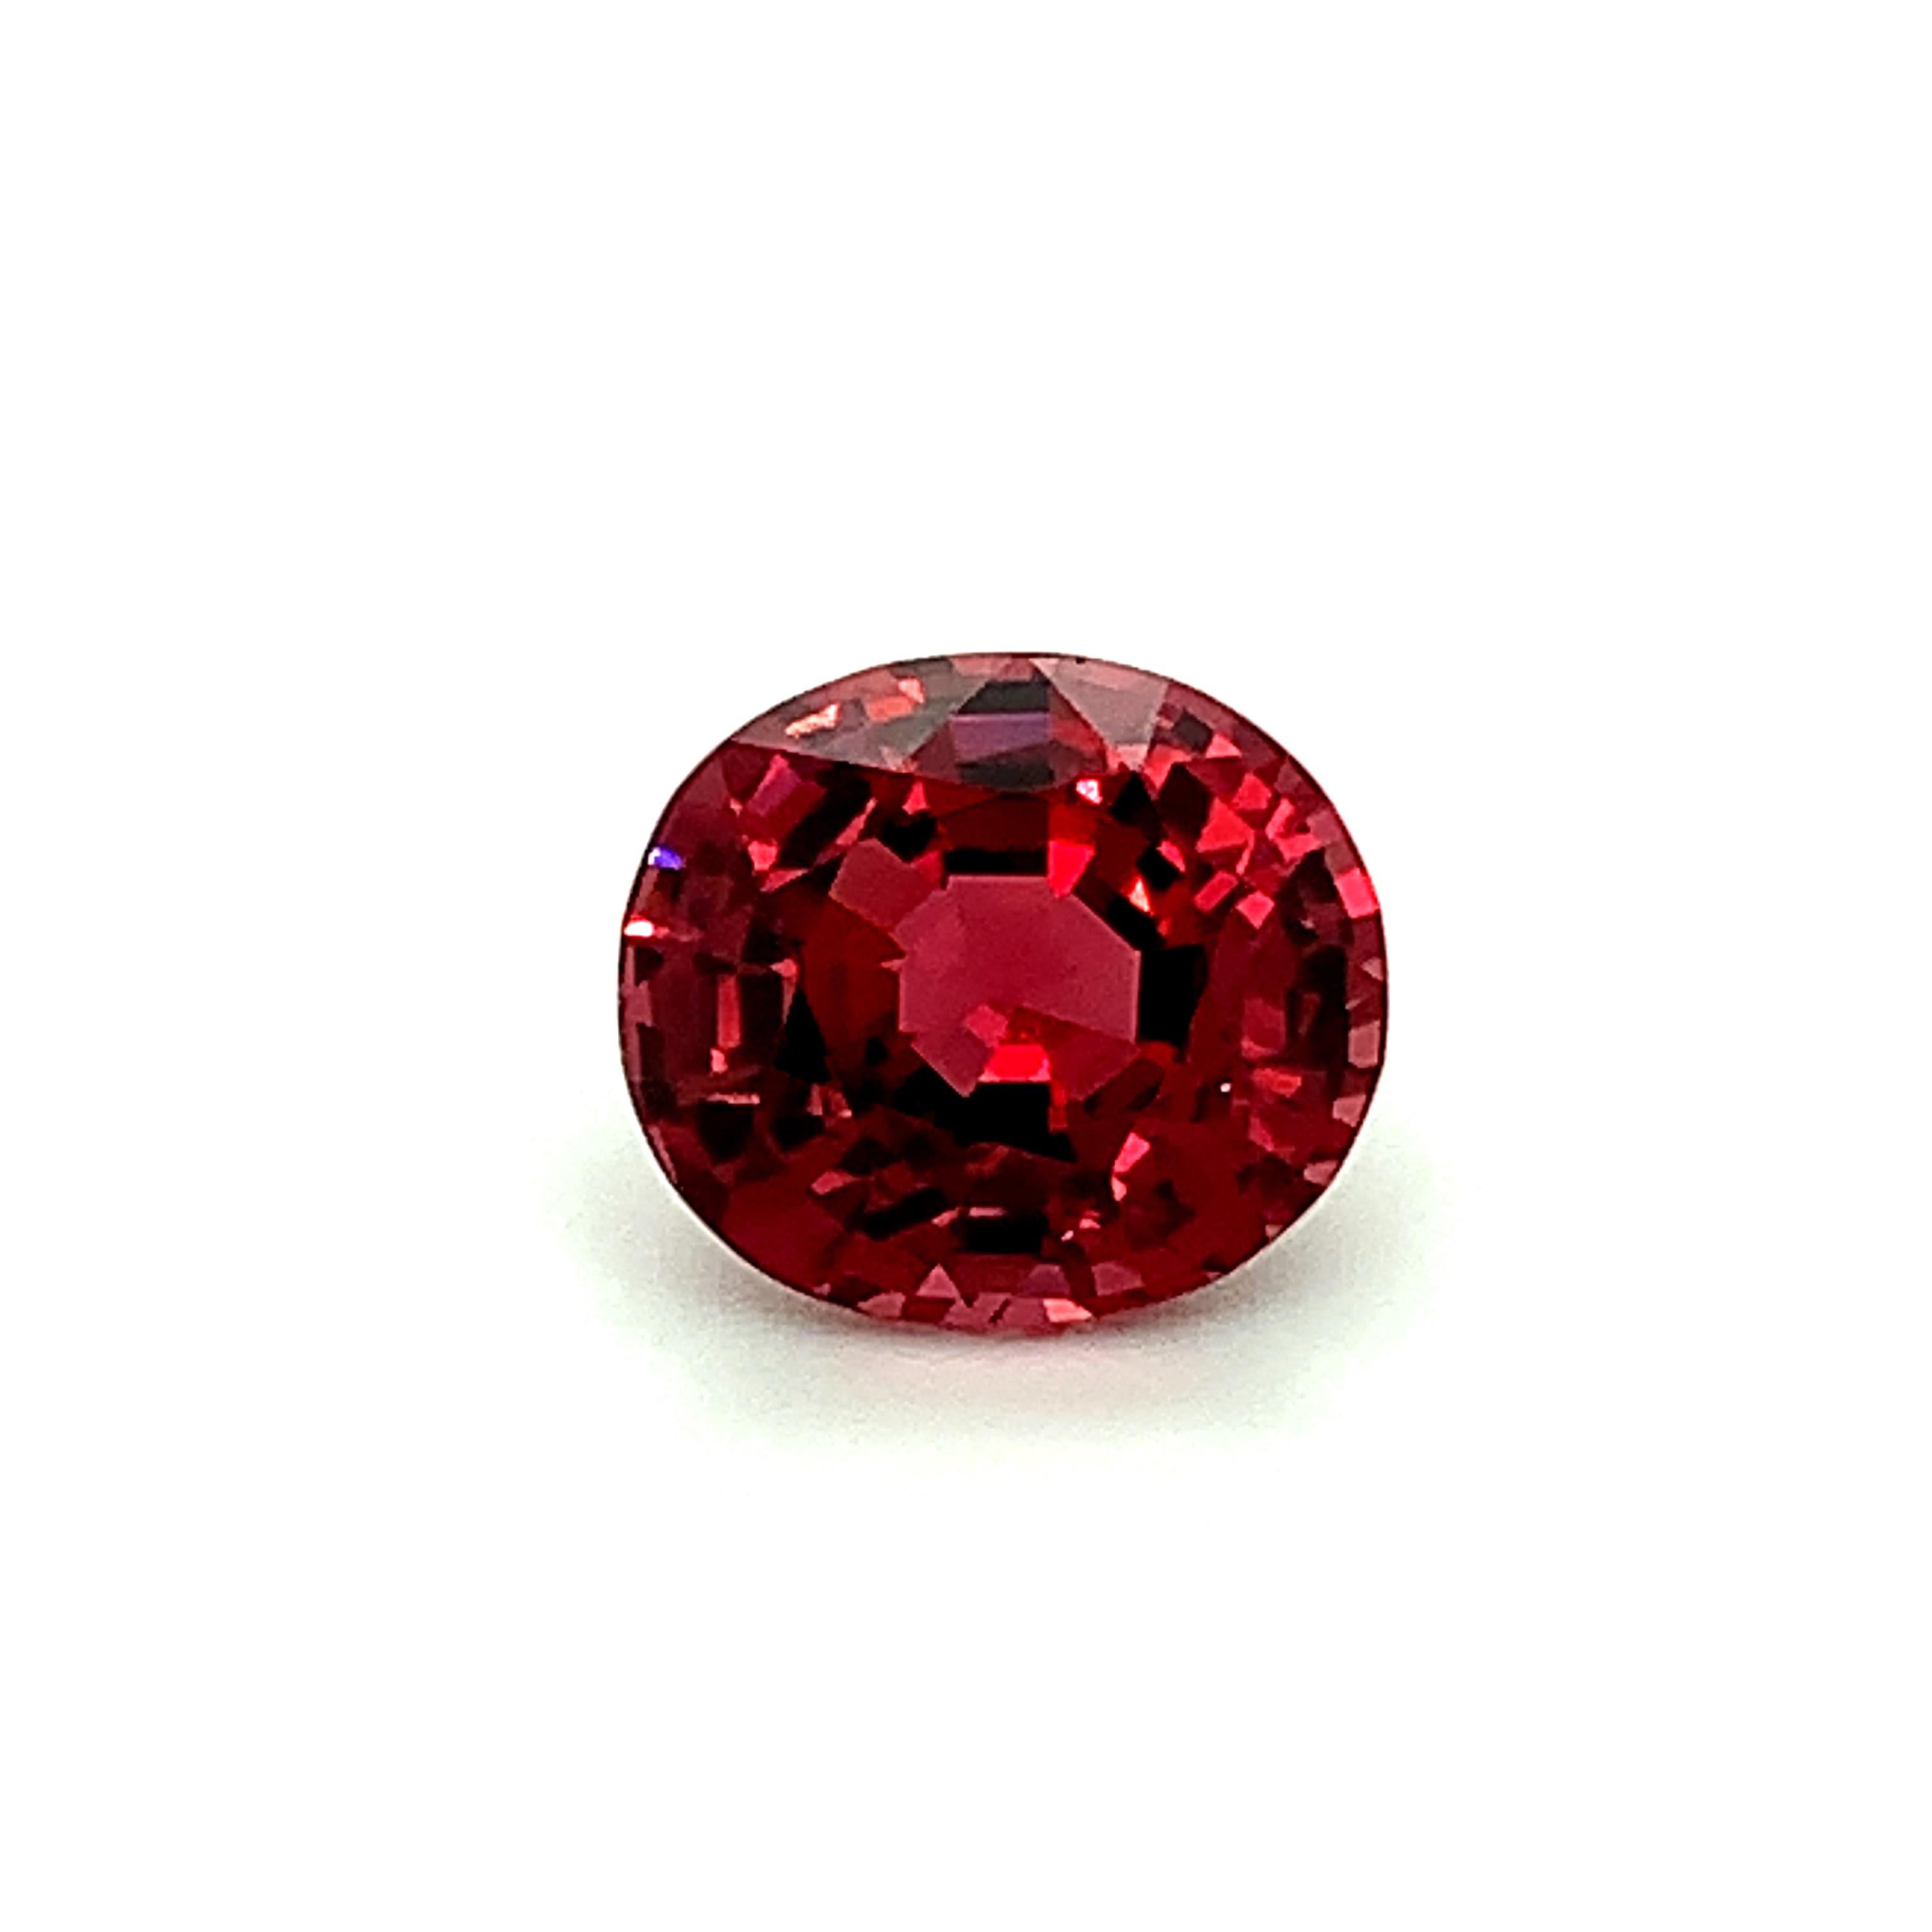 Unheated 5.14 Carat Red Spinel Oval, Unset Loose Gemstone, GIA Certified 4